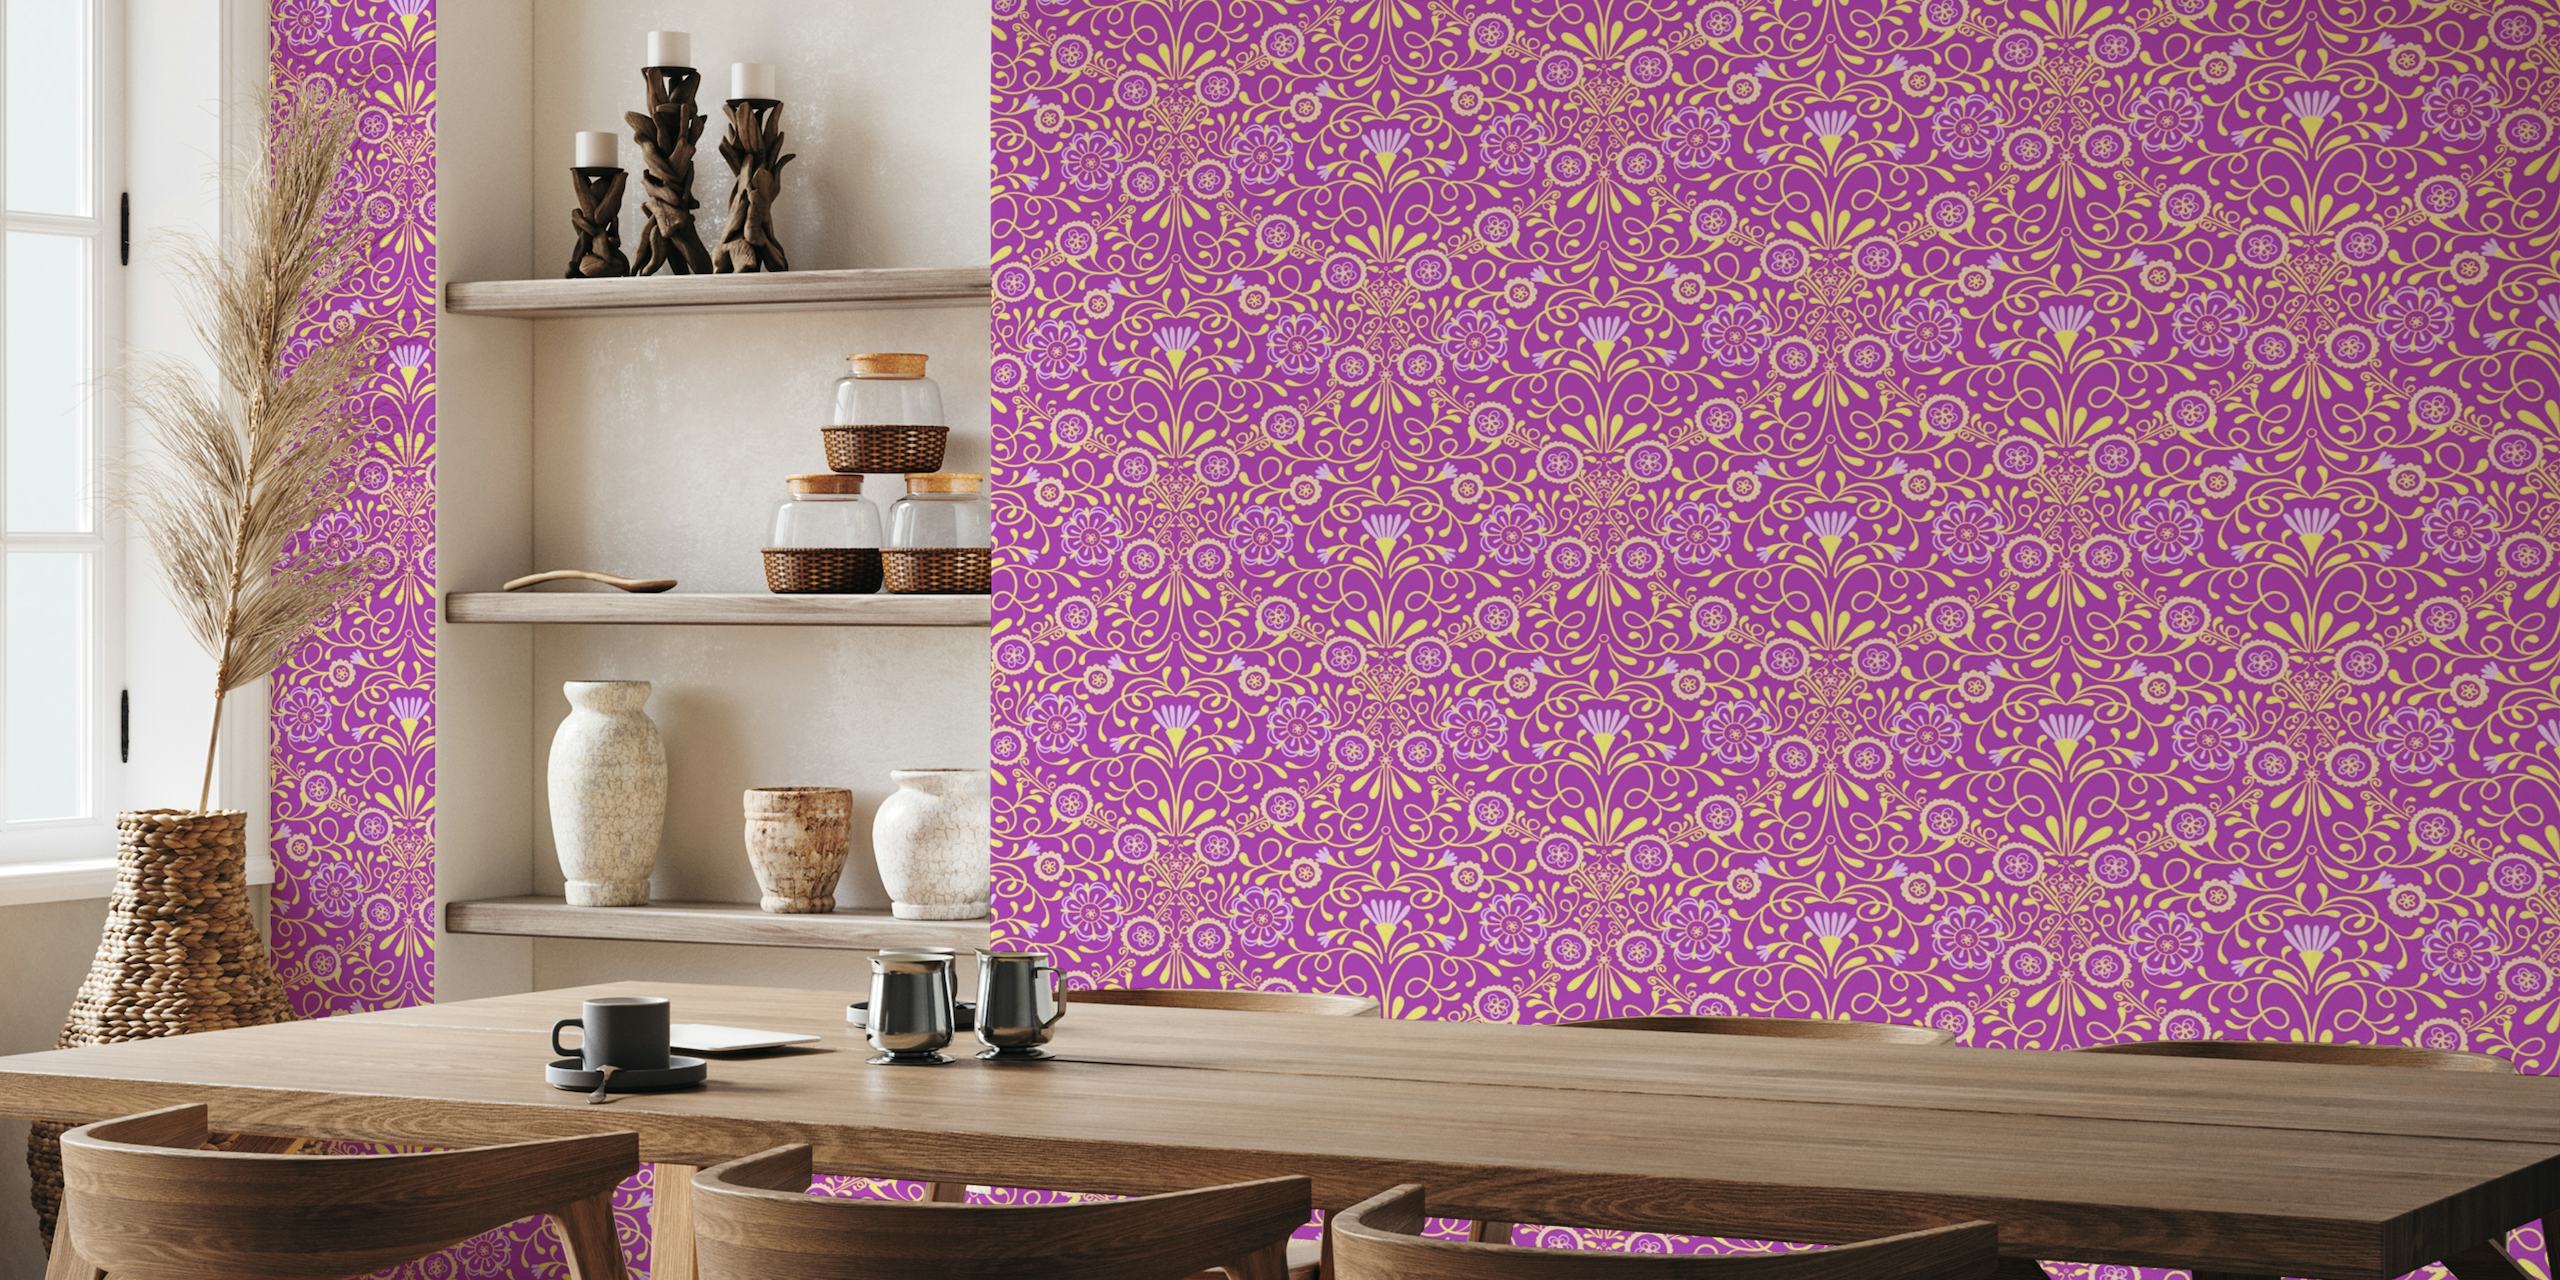 Tuscan Tile in Magenta, Yellow, and Purple papel de parede